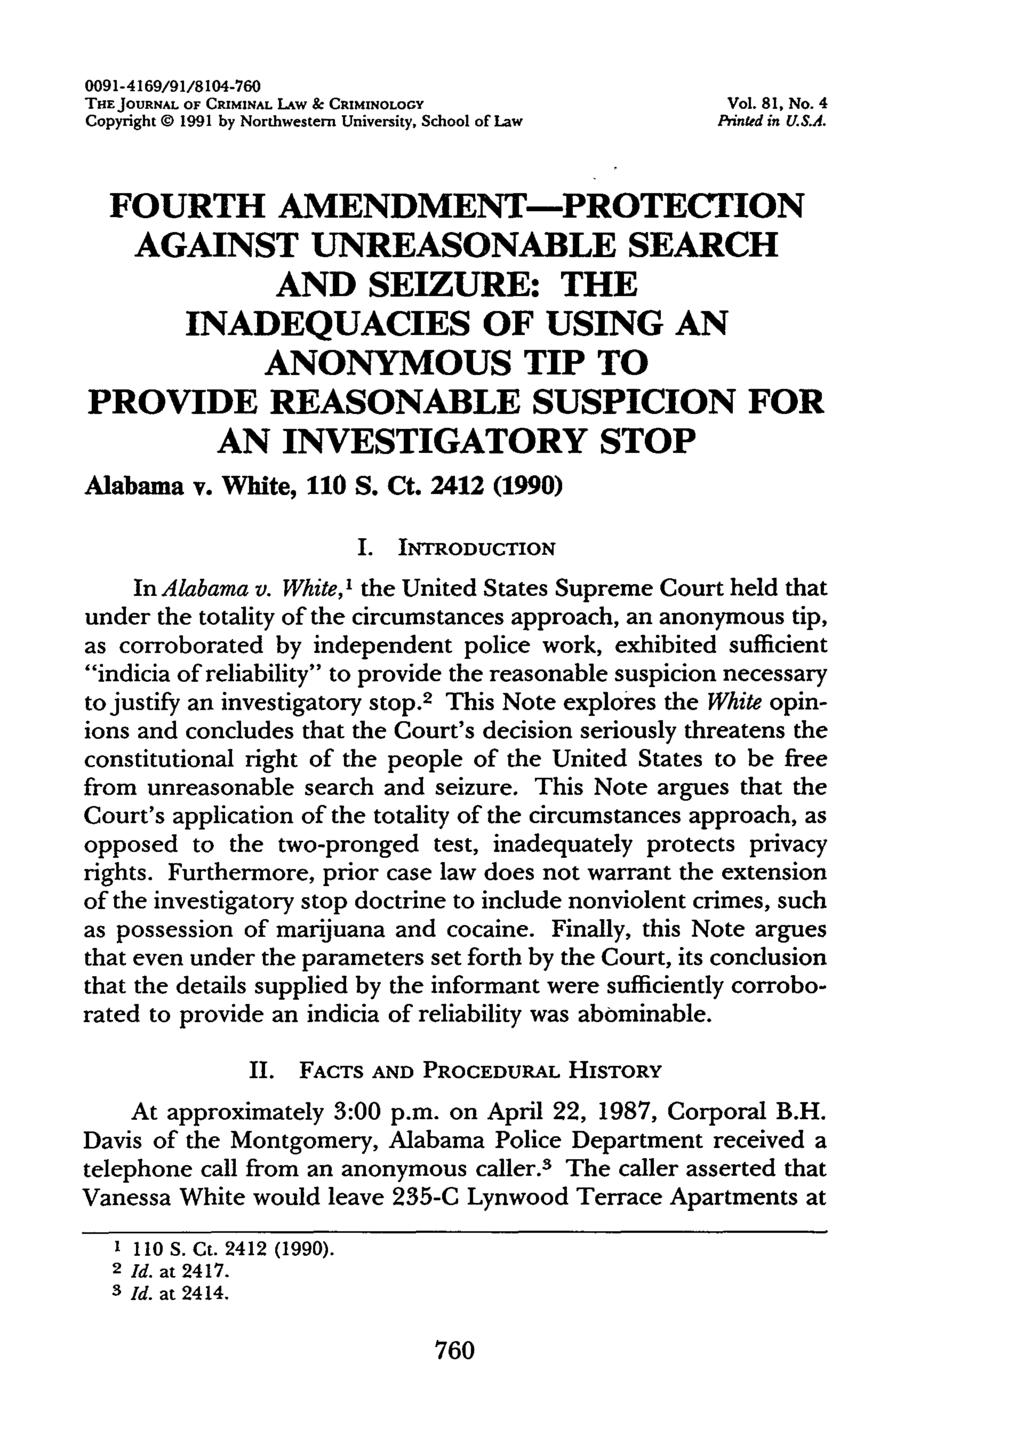 0091-4169/91/8104-760 THE JOURNAL OF CRIMINAL LAW & CRIMINOLOGY Vol. 81, No. 4 Copyright 1991 by Northwestern University, School of Law Pnted in U.SA.